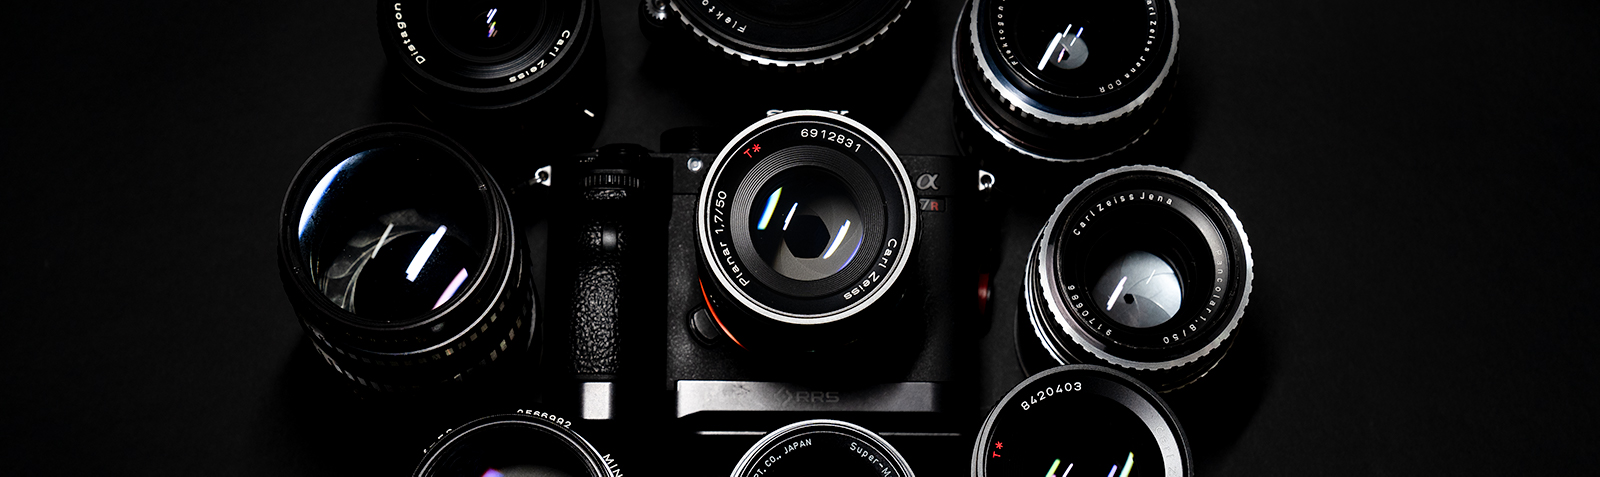 There are problems with focusing vintage/manual focus lenses on Sony mirrorless cameras.